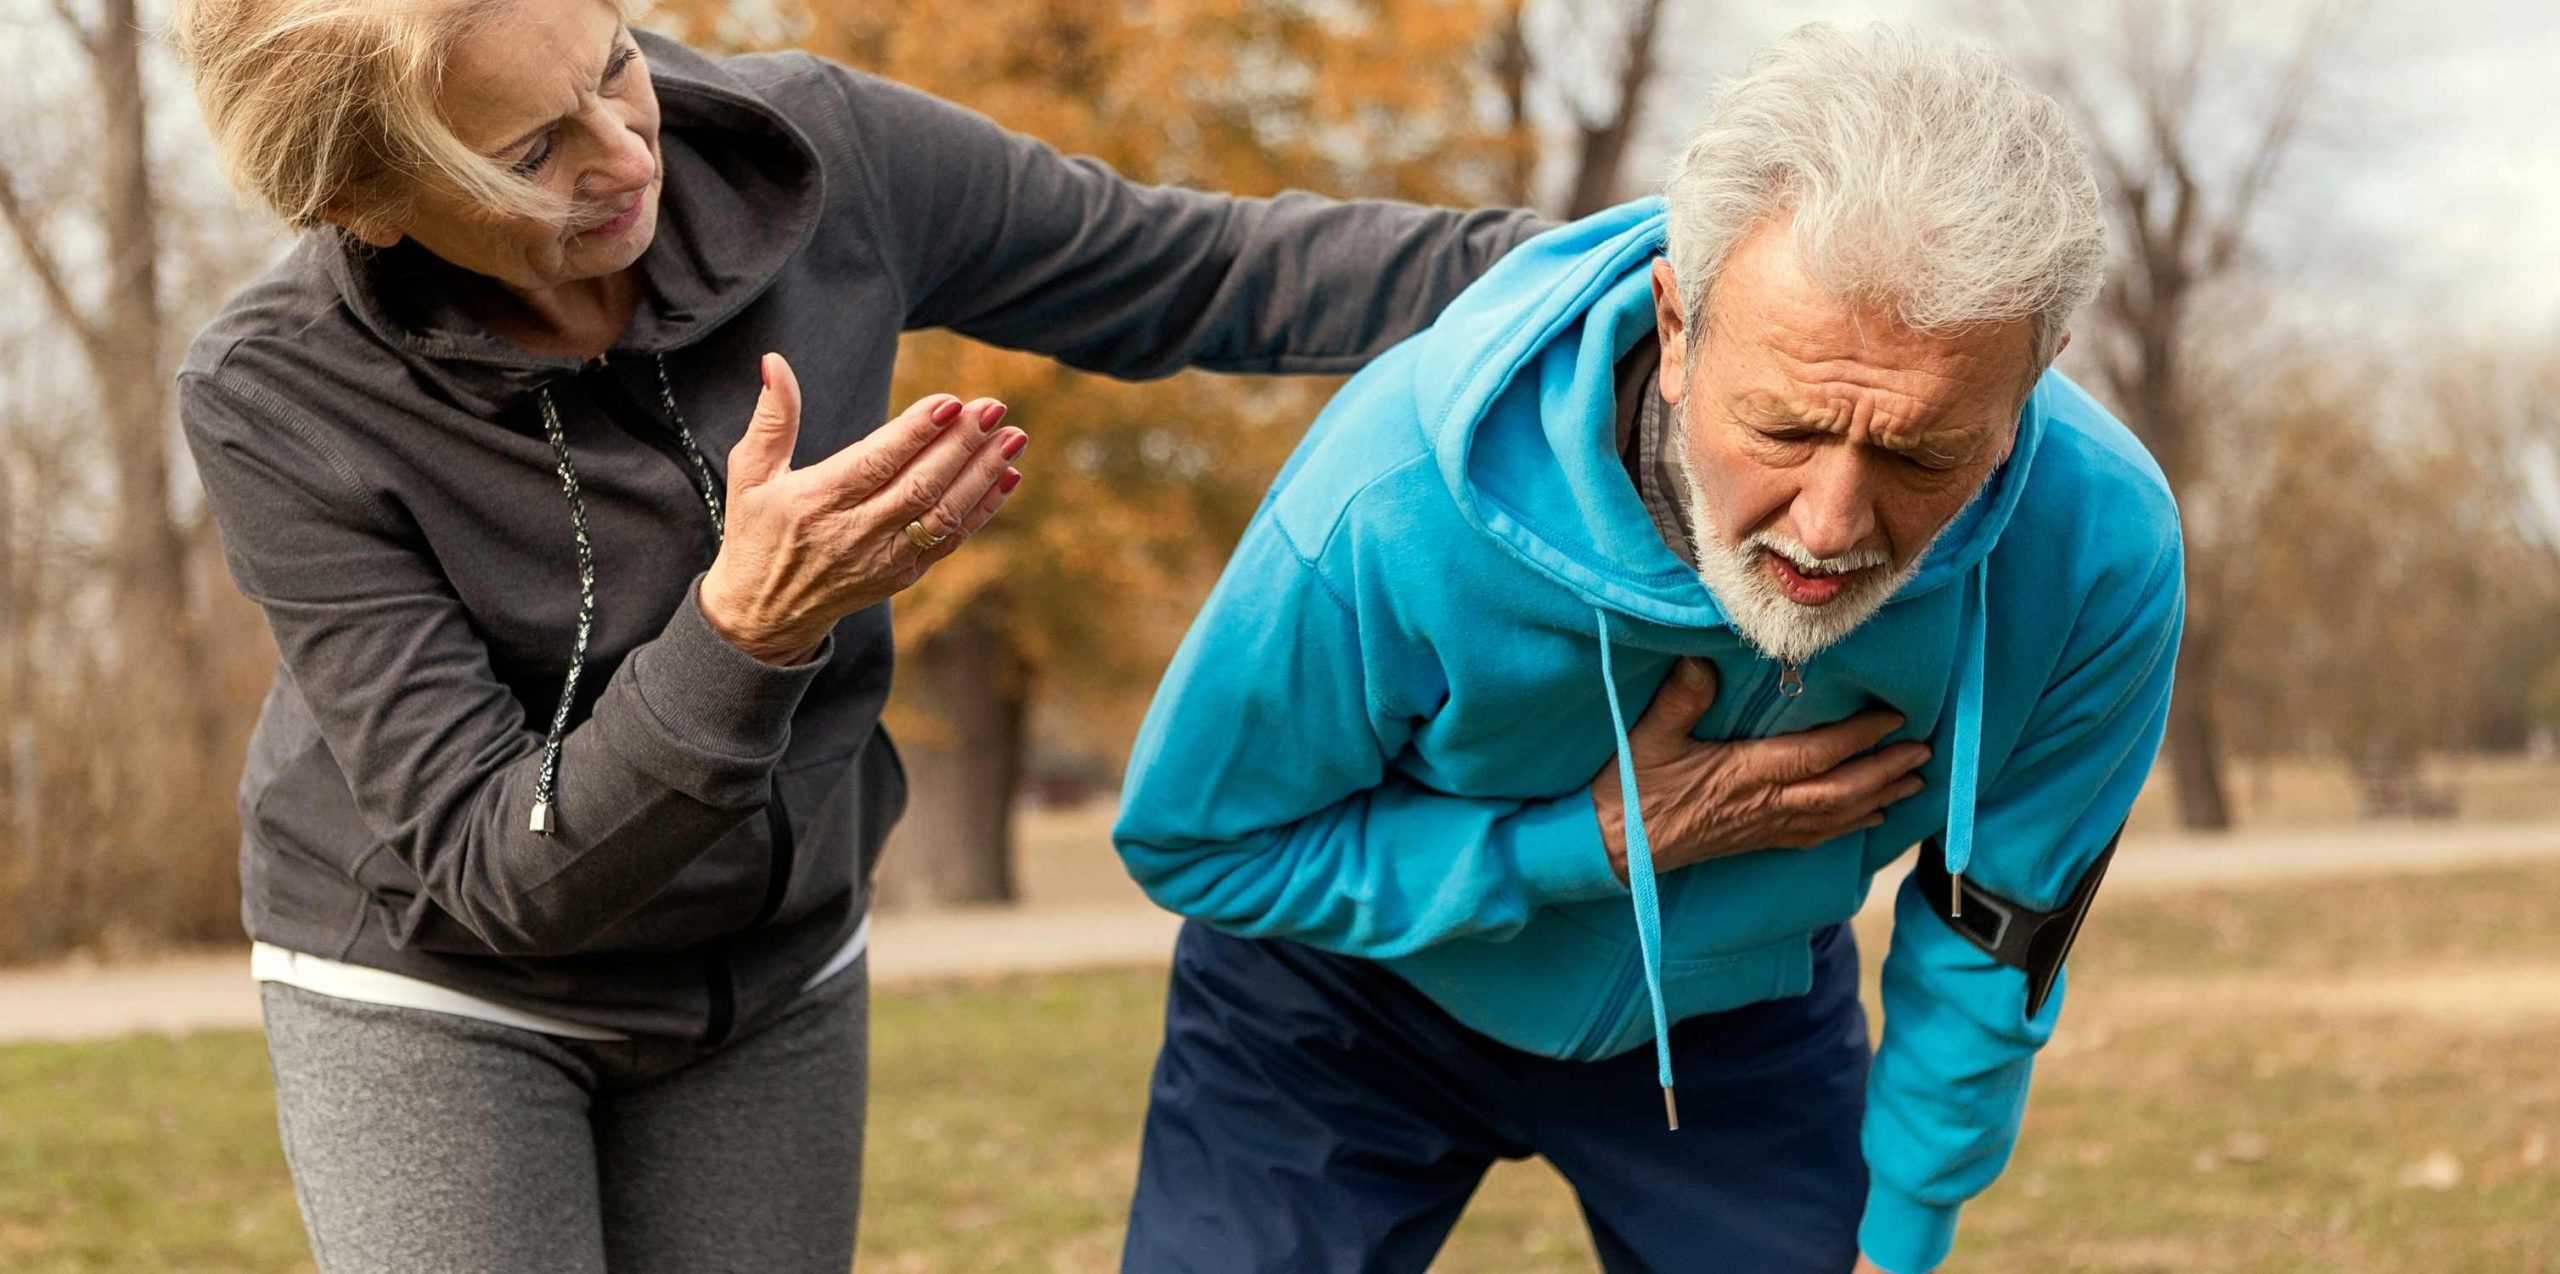 7 Lifestyle Changes to Prevent a Second Heart Attack